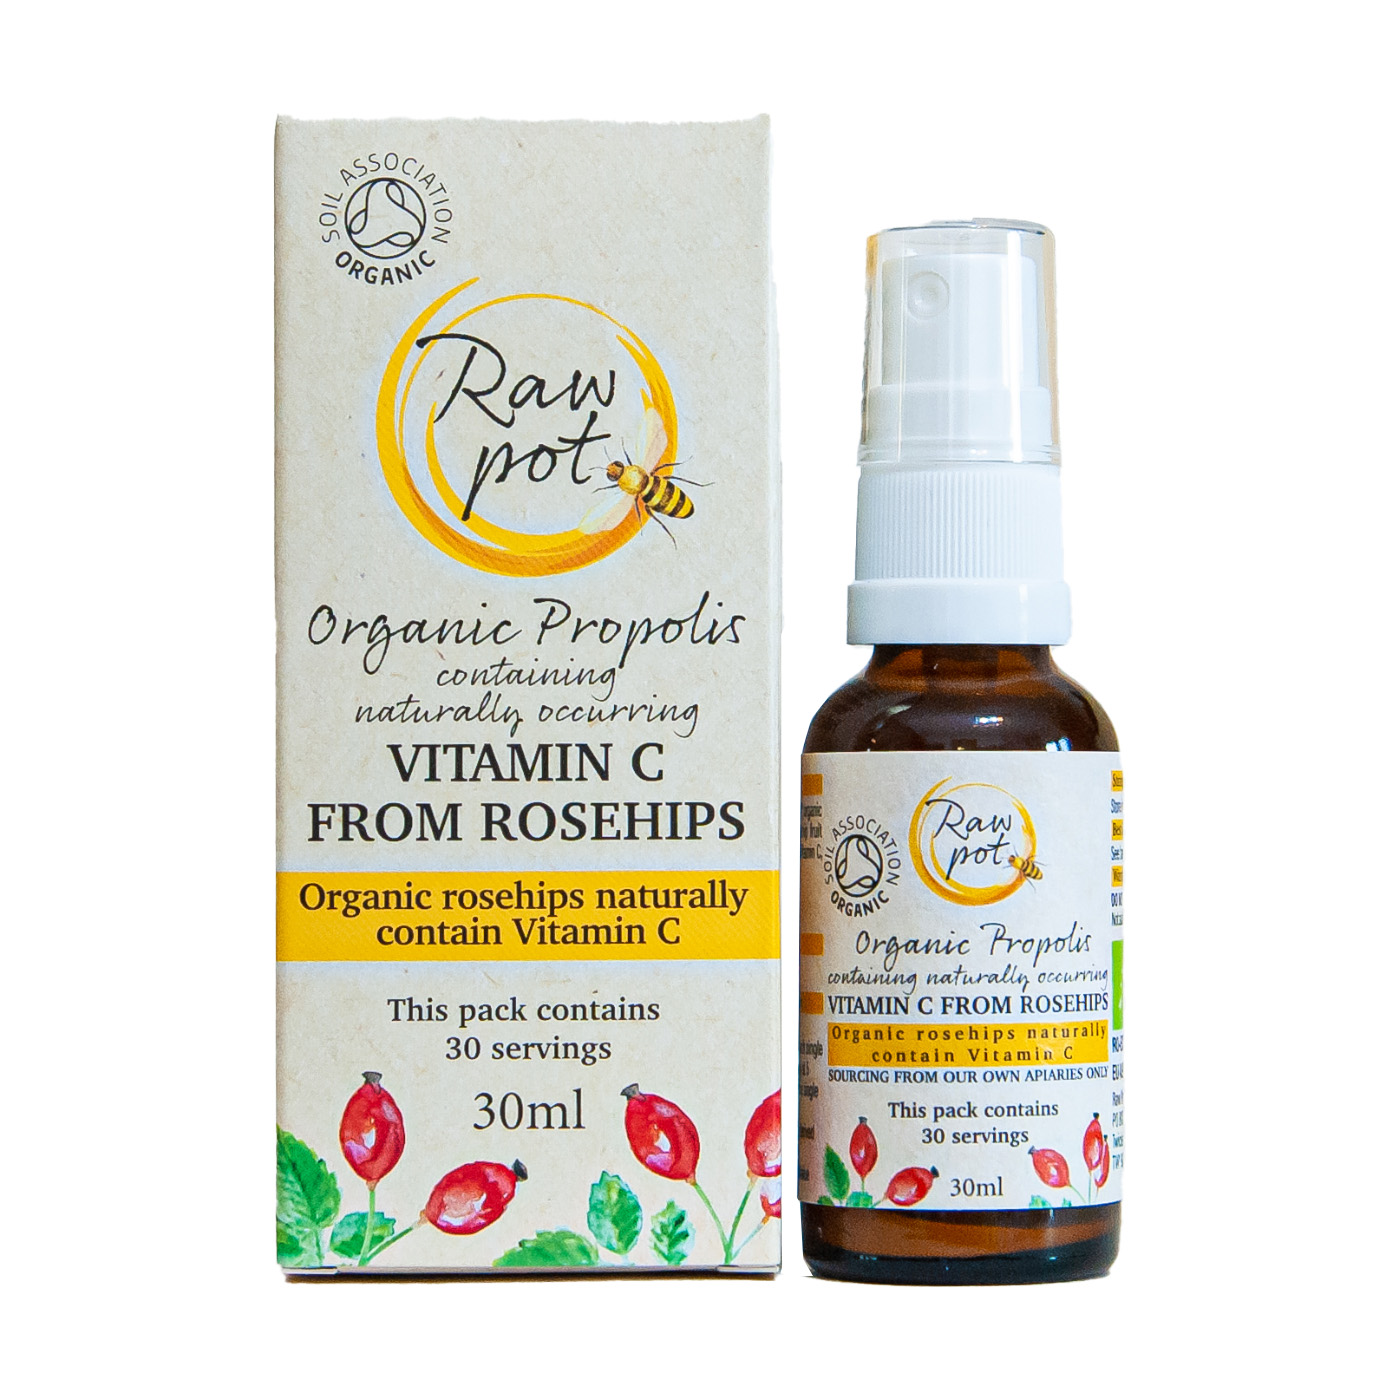 Organic Propolis with Vitamin C from Rosehips